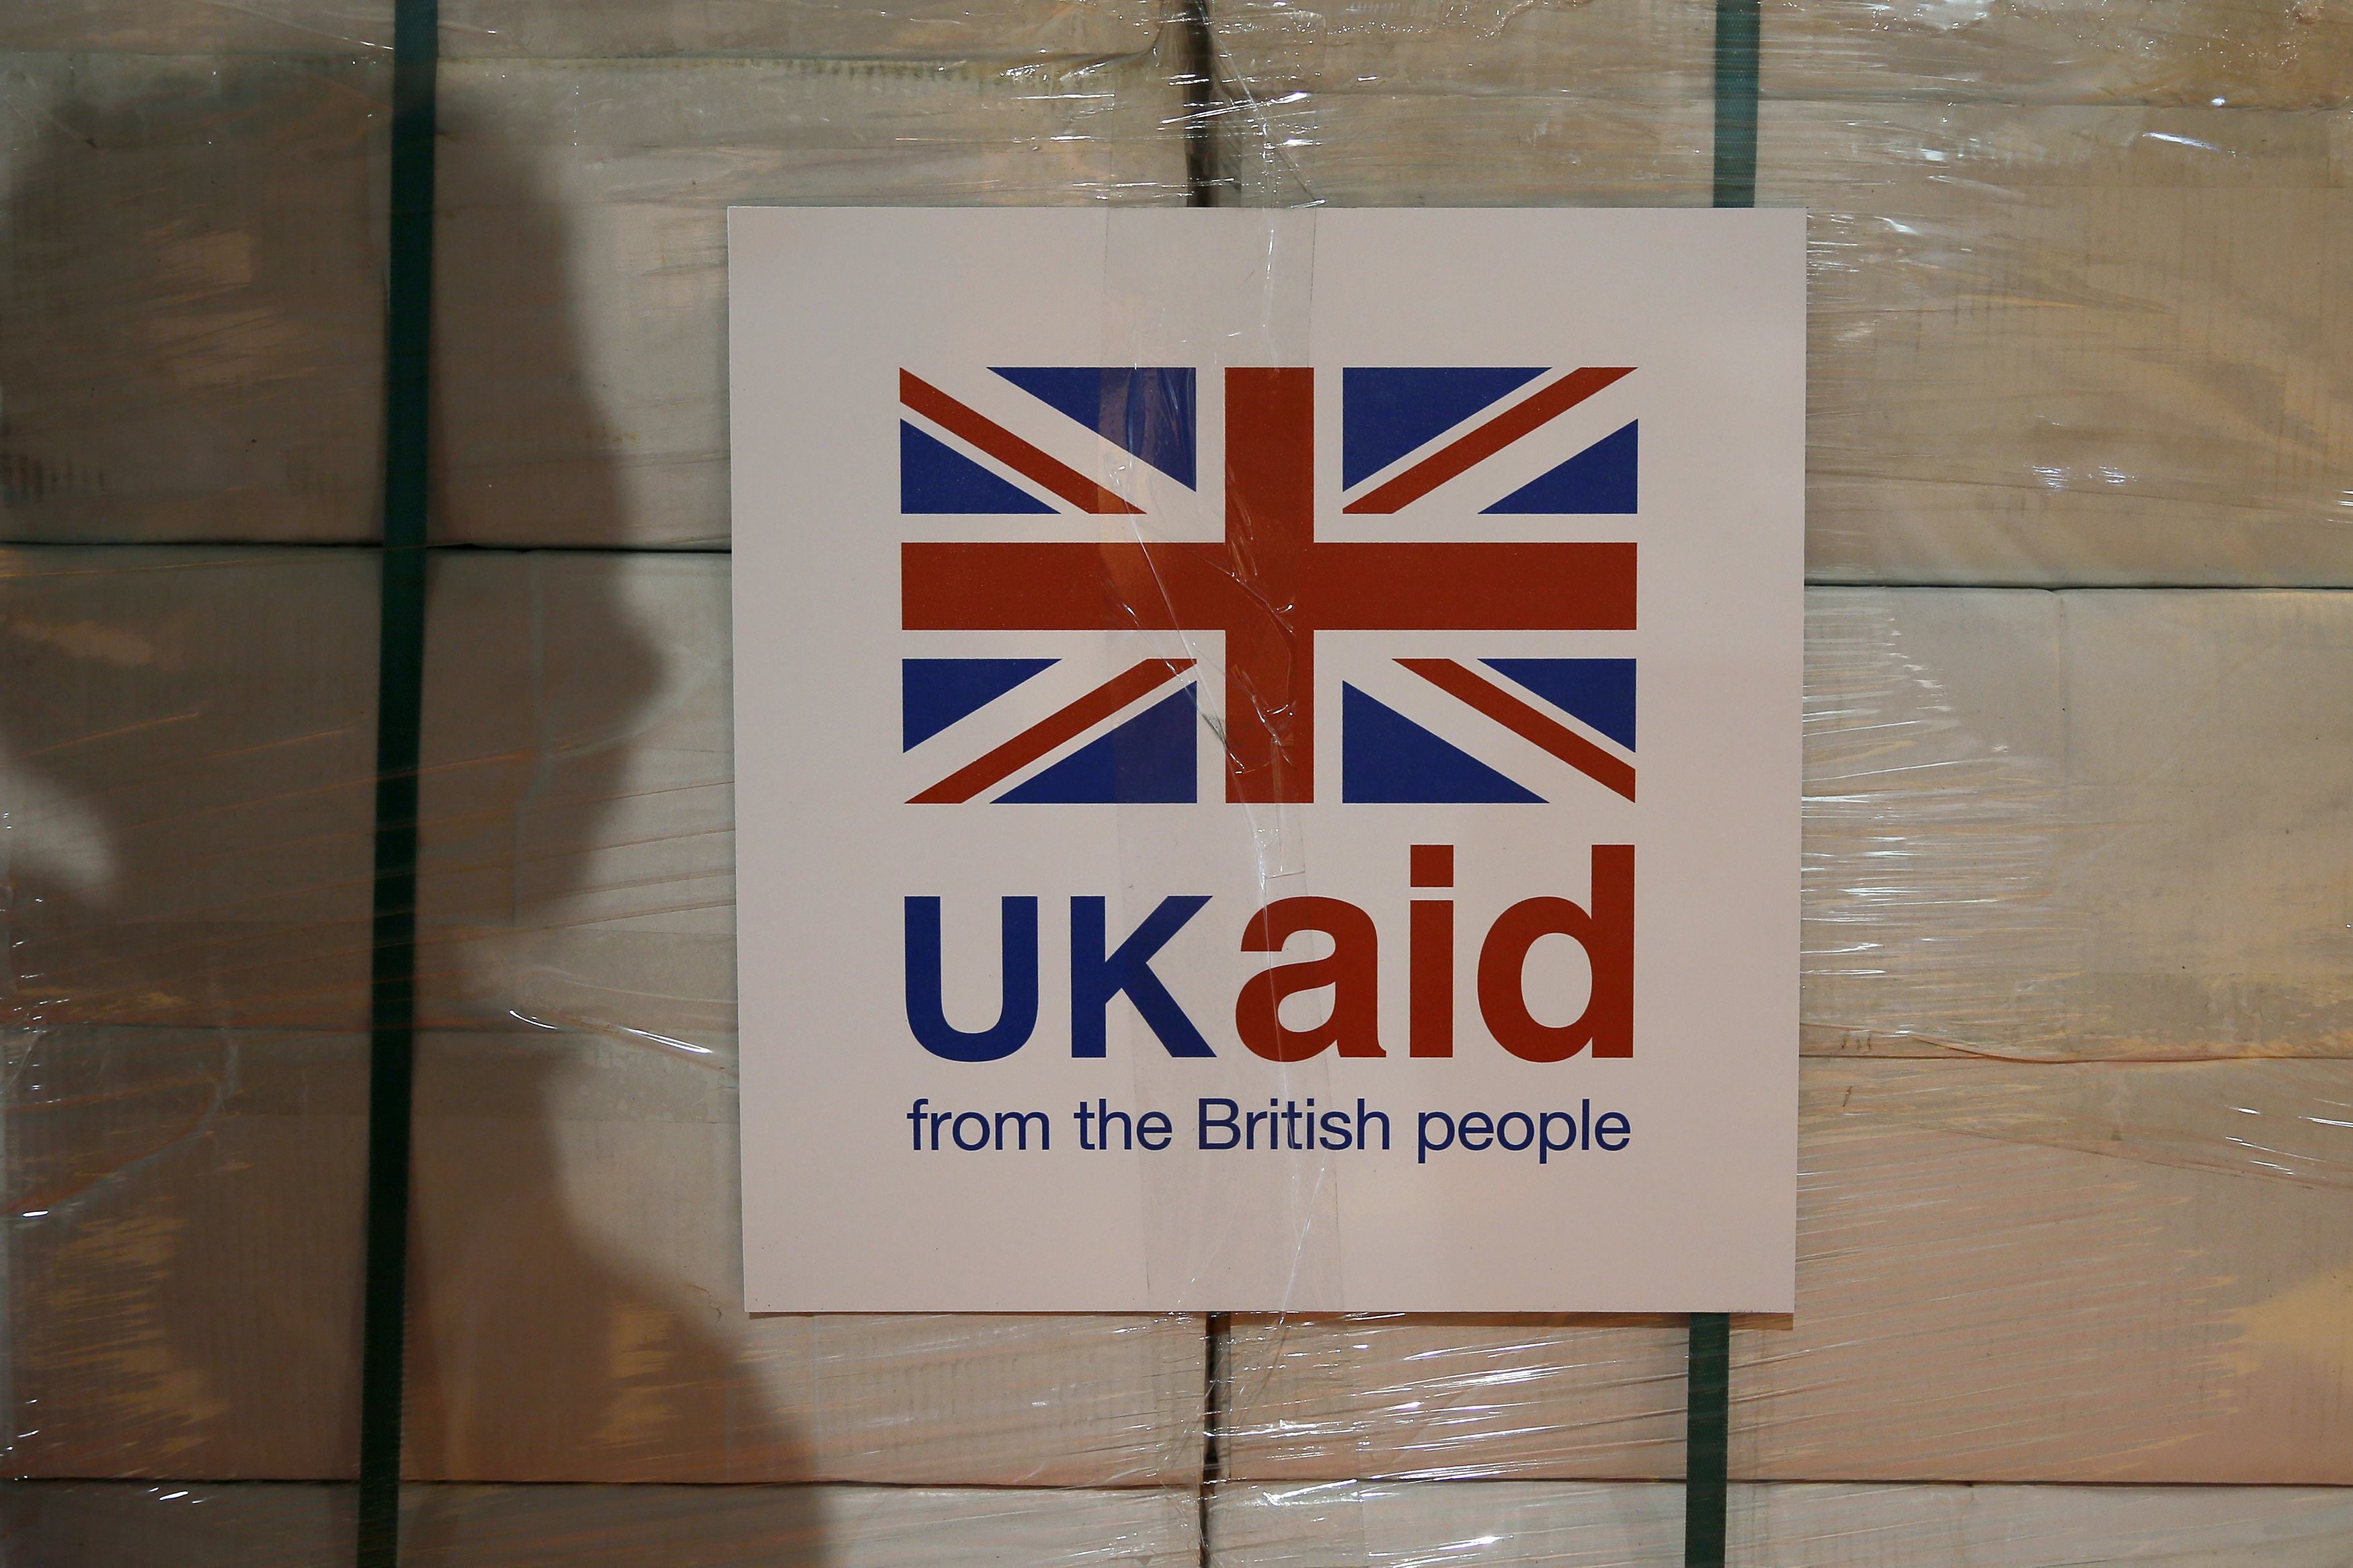 UK aid provides soft power overseas, say Tory rebels